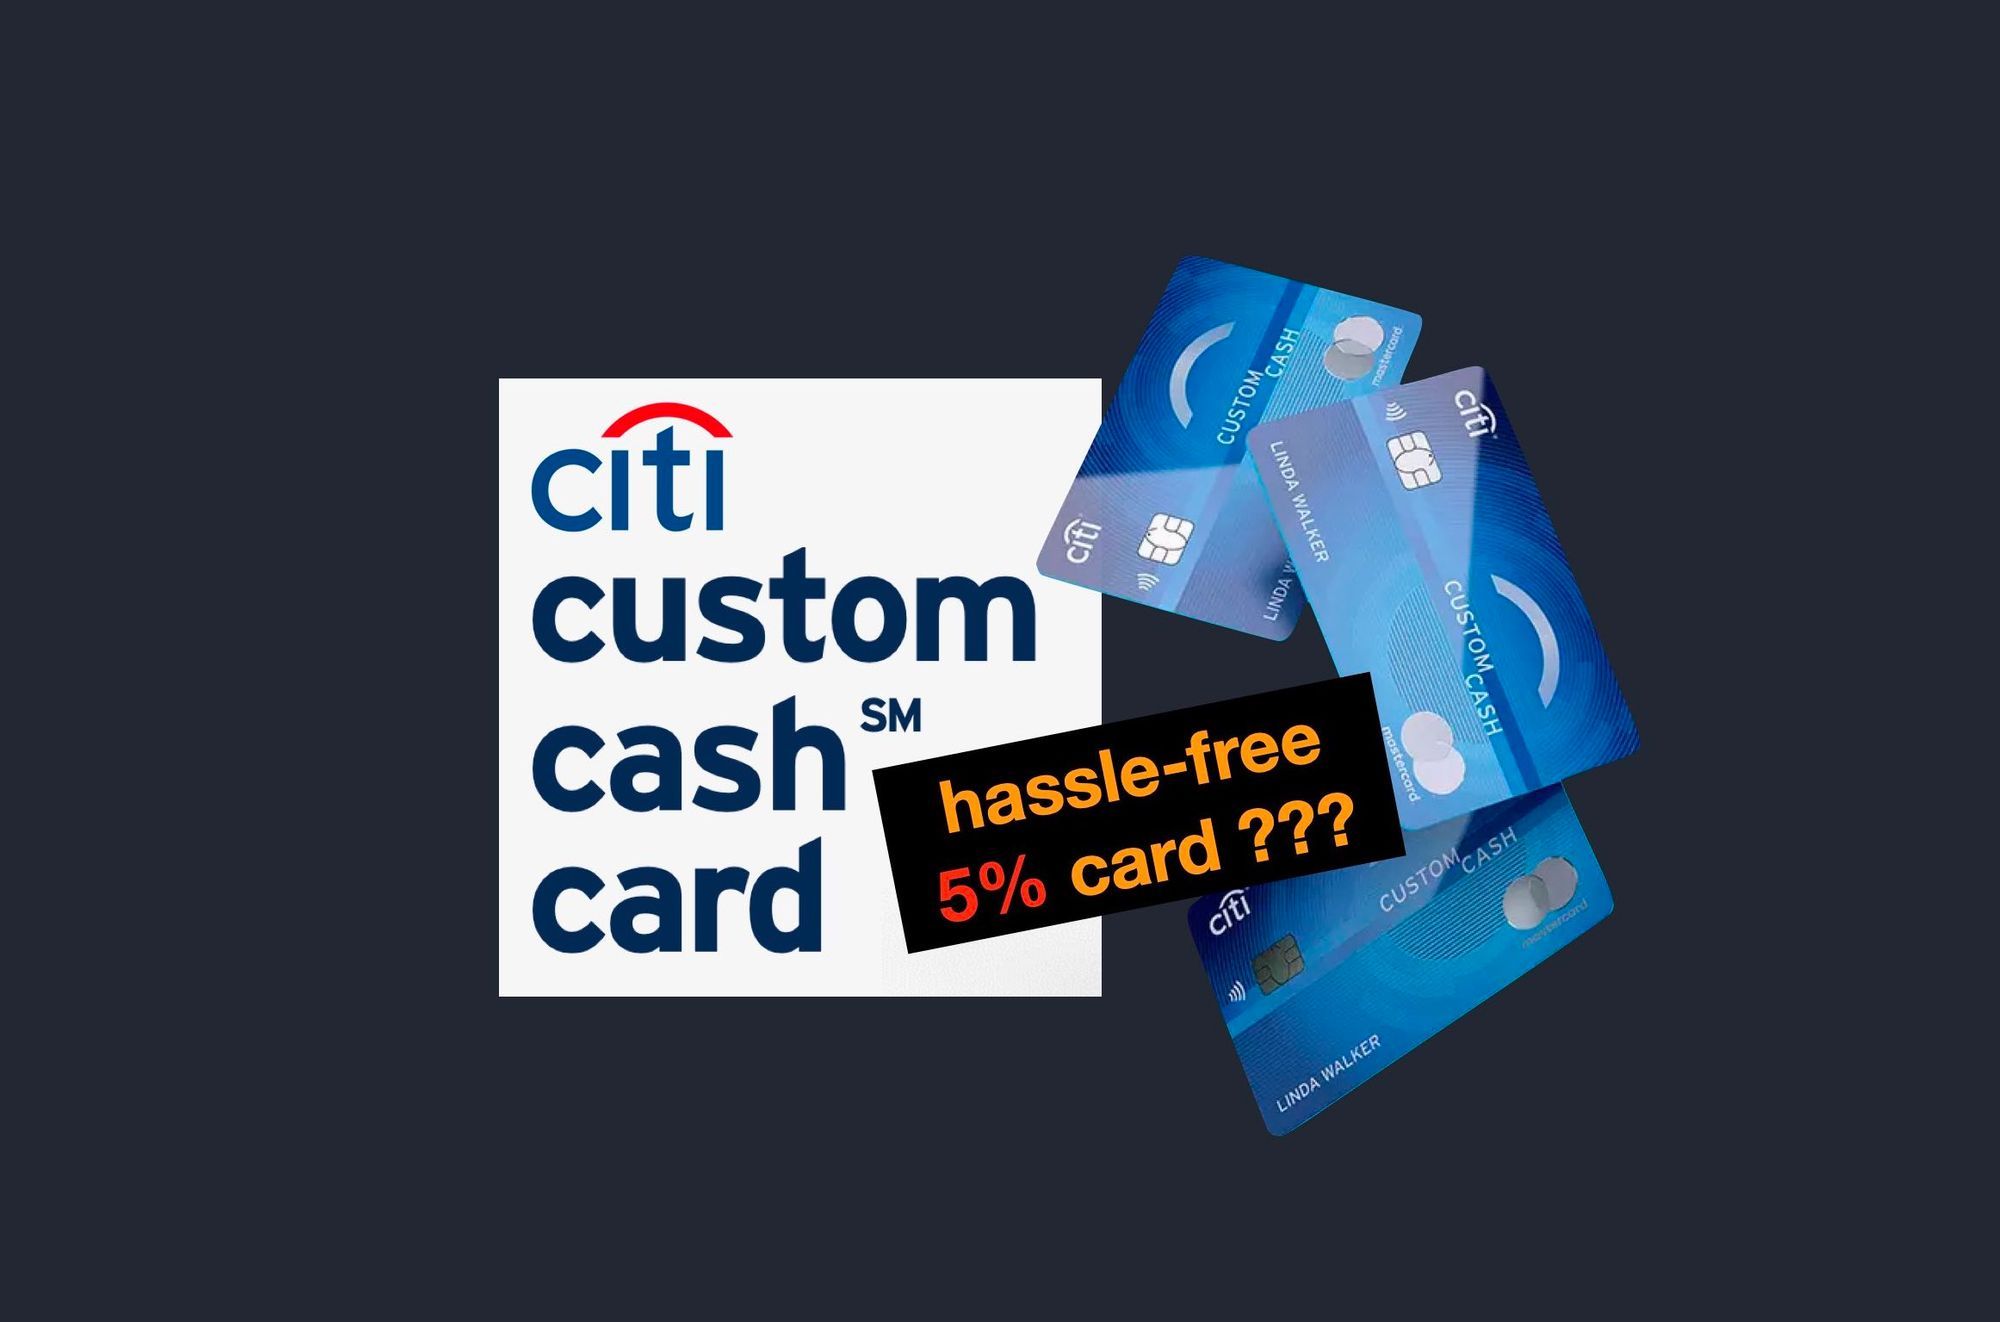 Citi Custom Cash: Who Is This Card For?